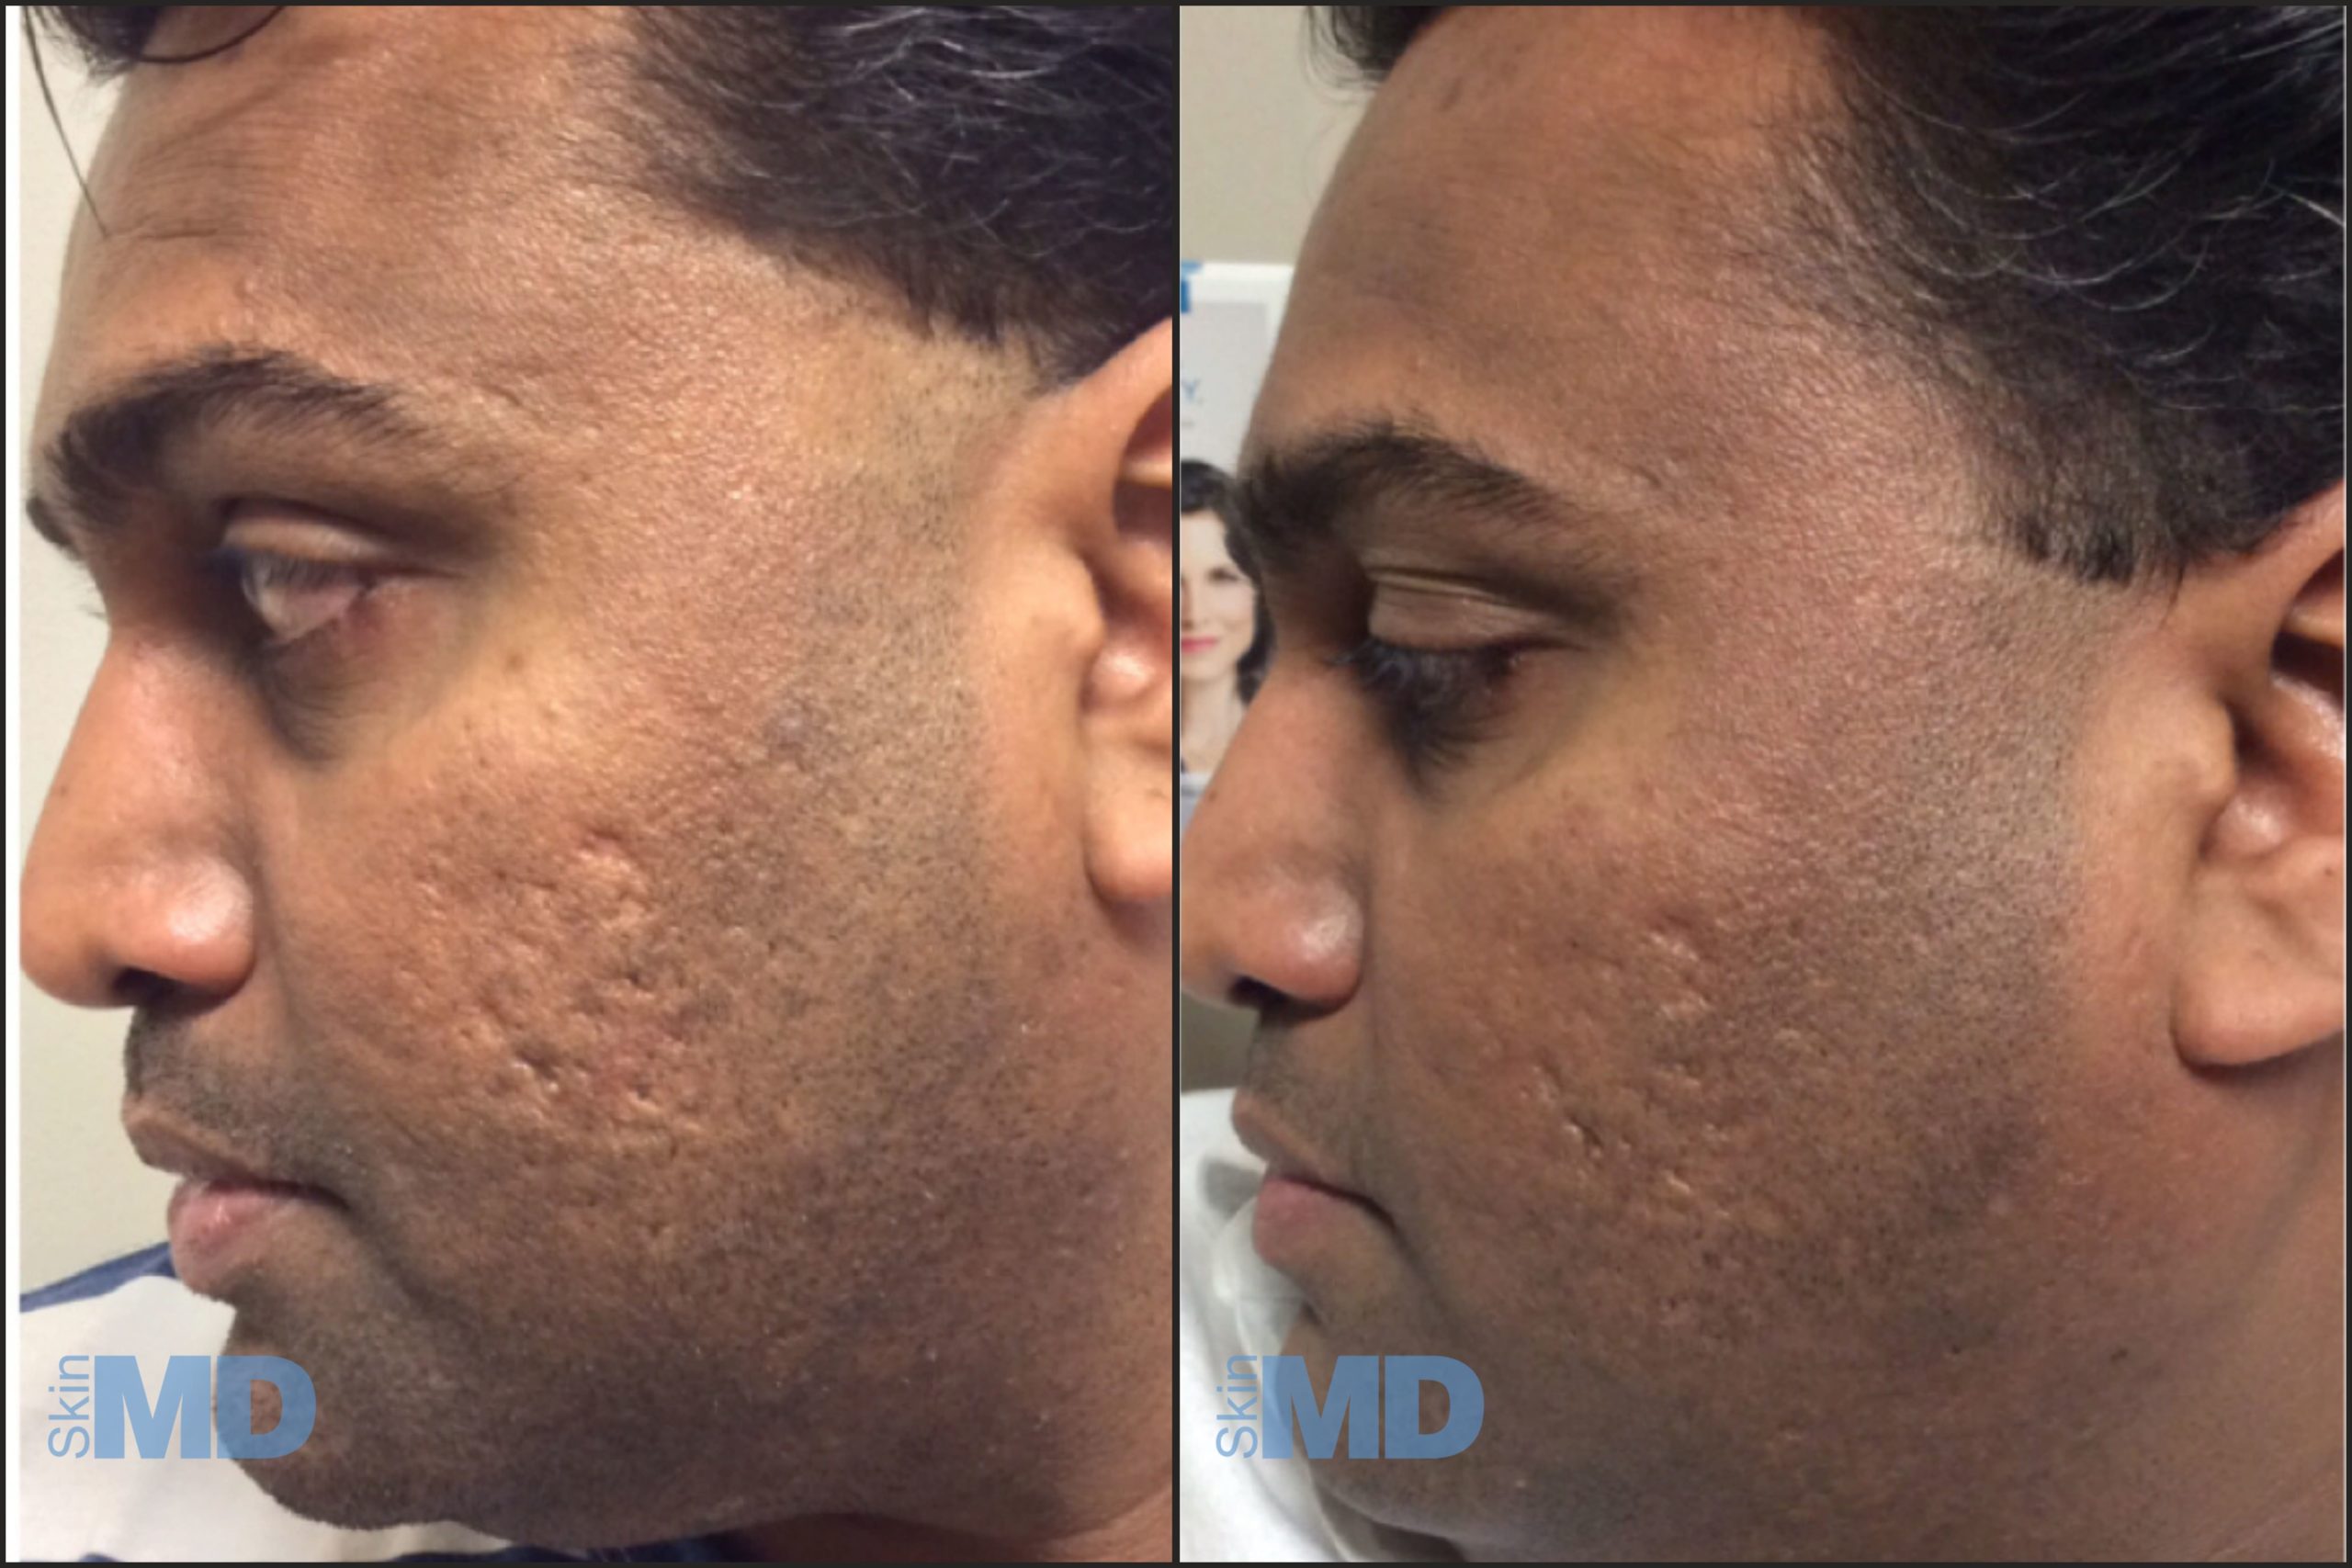 Before and after 1540 treatments